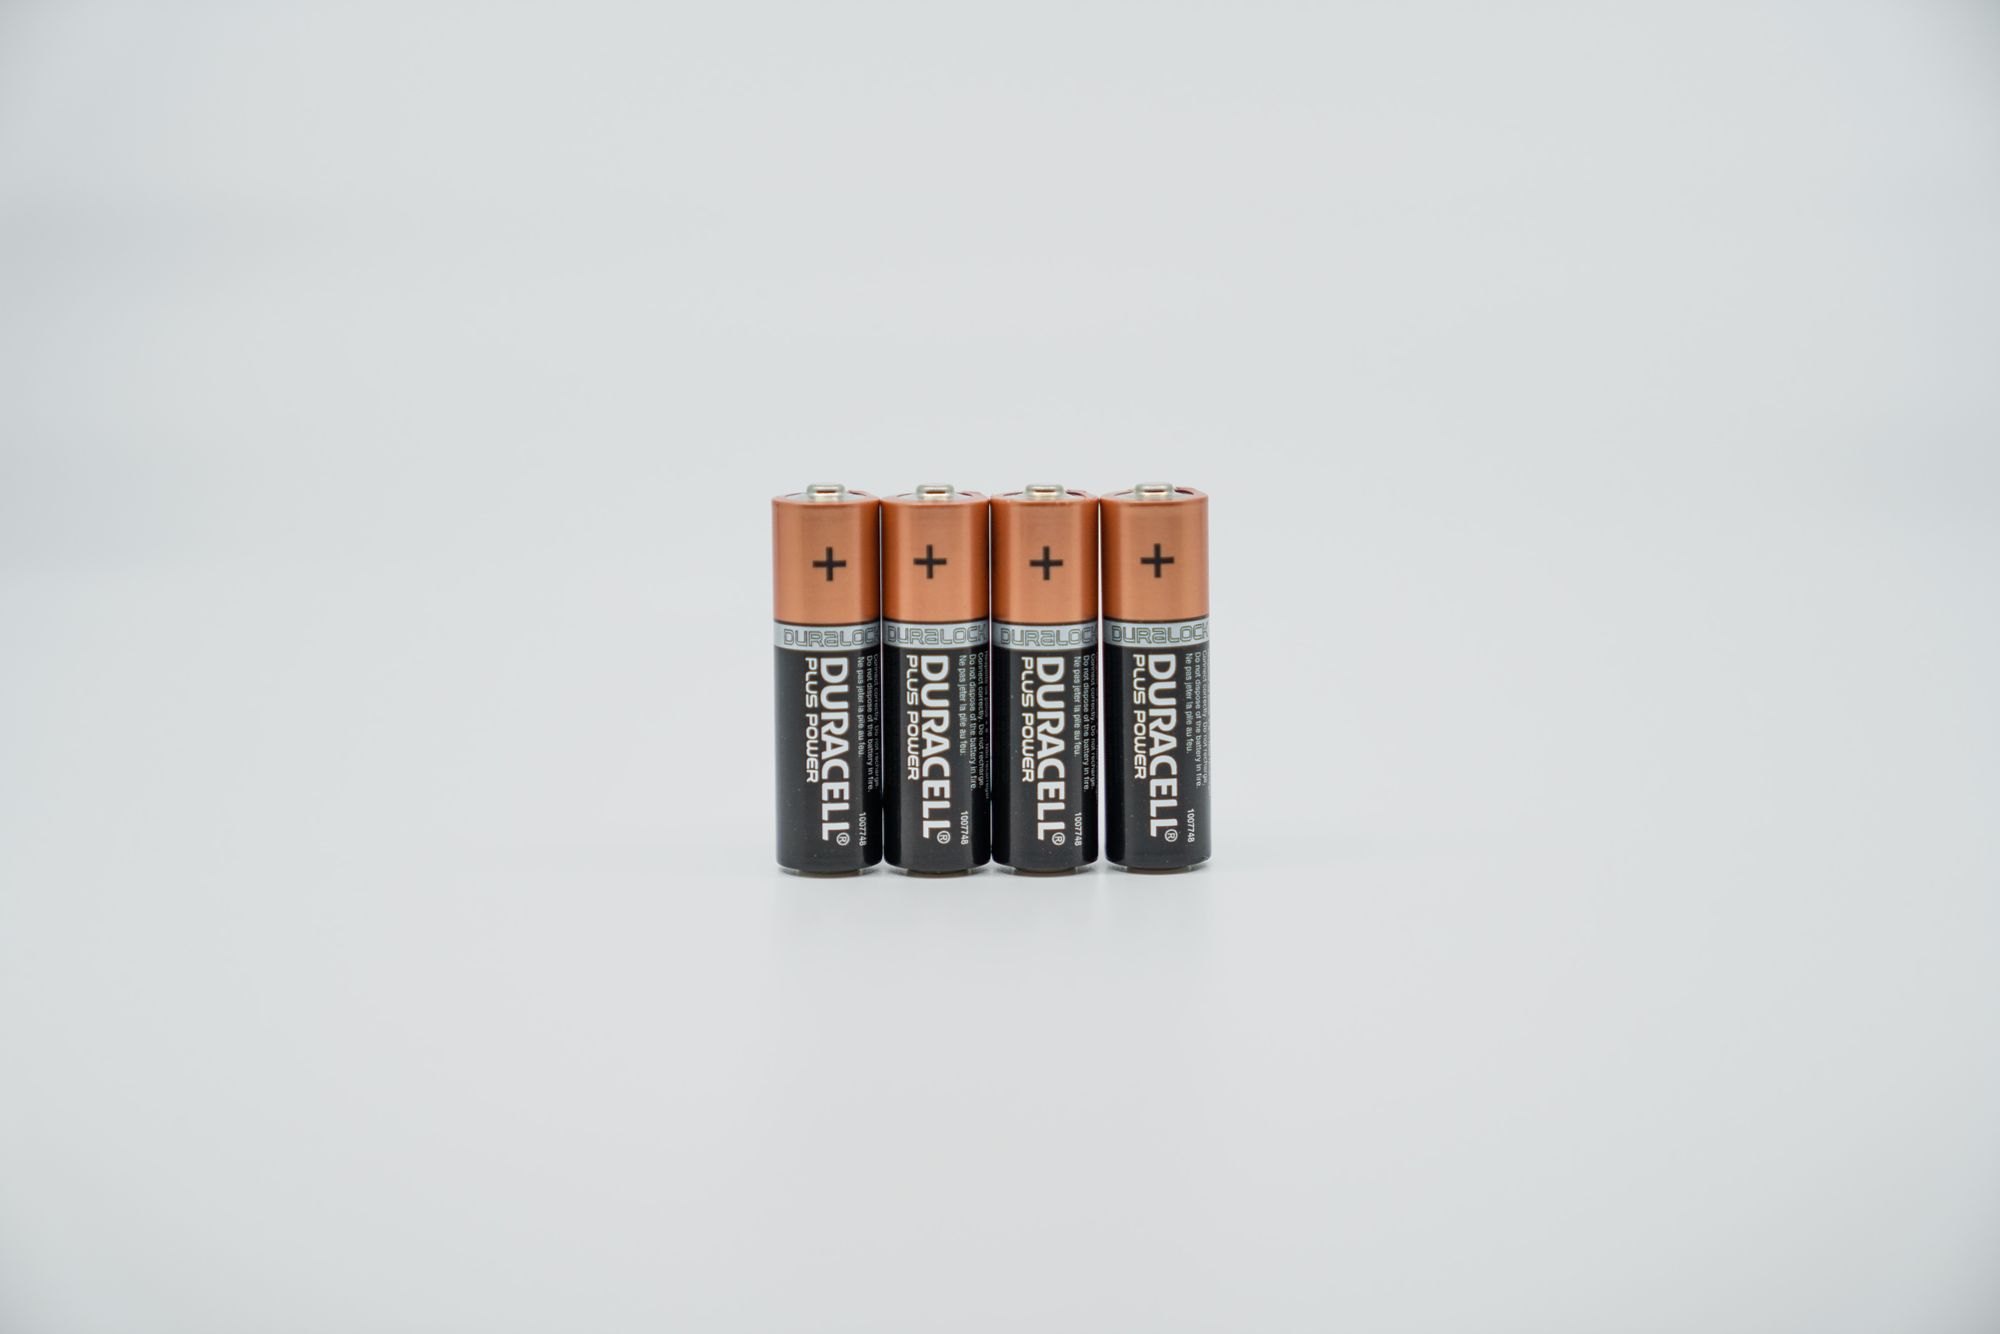 Spare batteries should always be in your camera gear